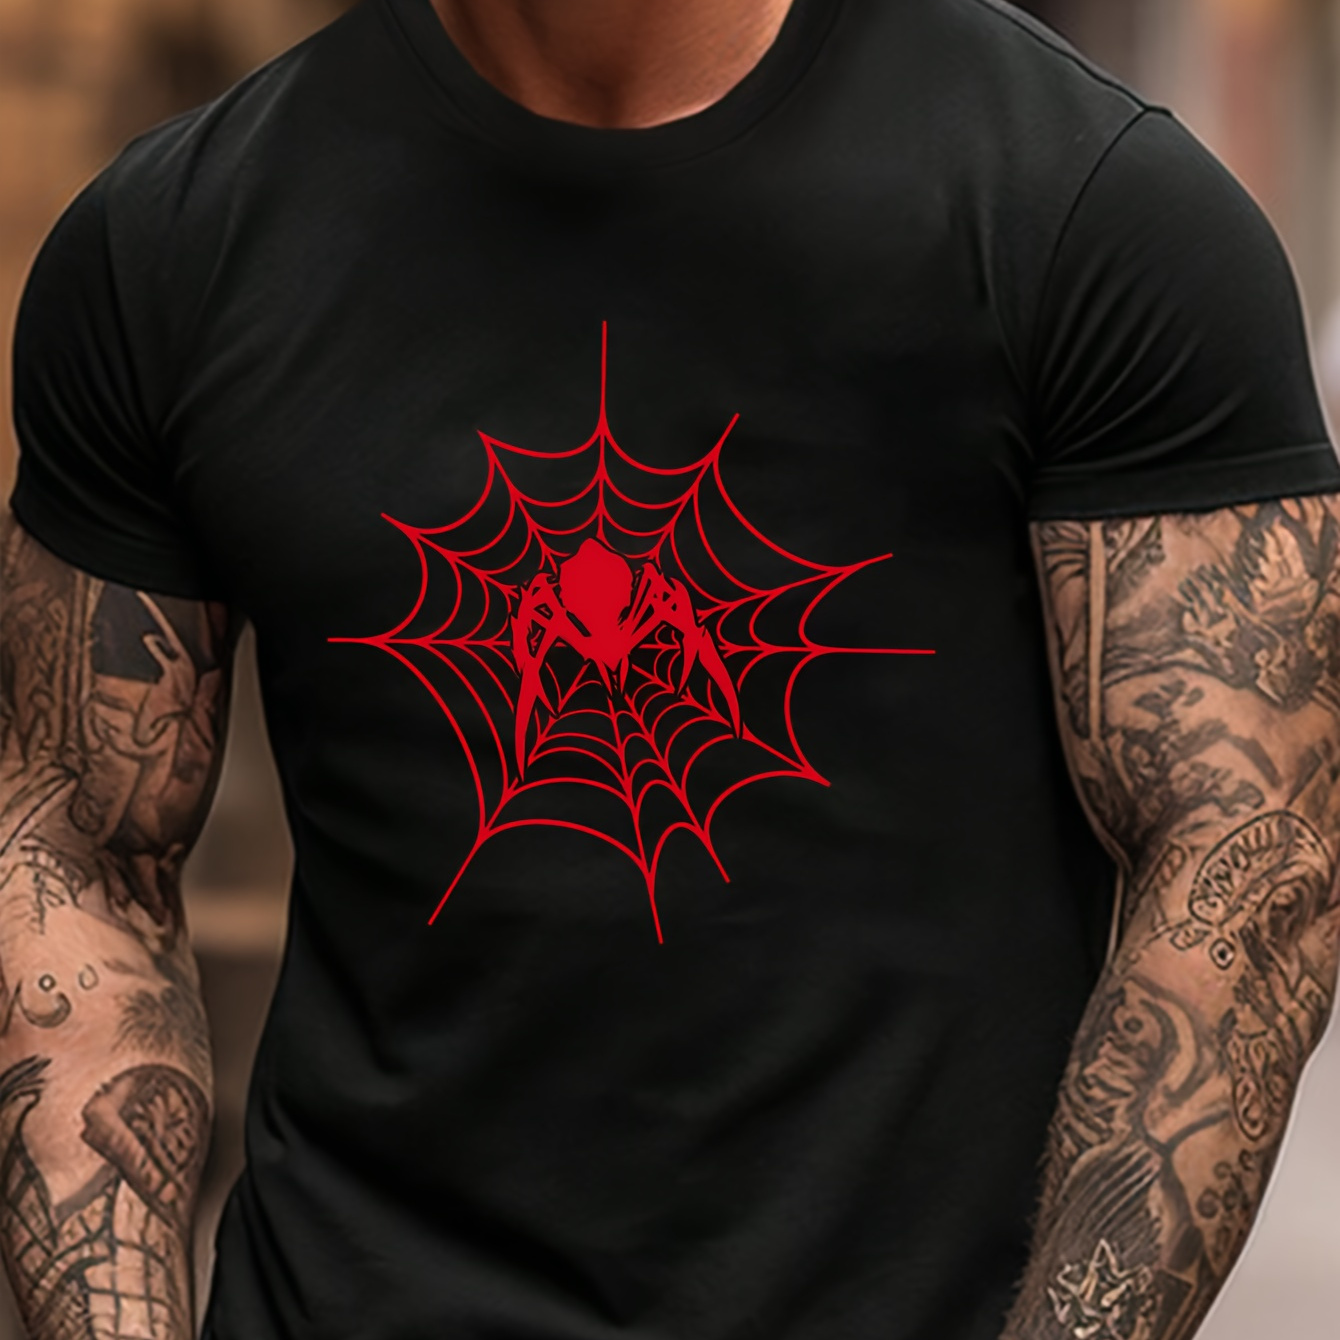 

Spider Web Print Men's Round Neck Short Sleeve Tee Fashion Regular Fit T-shirt Top For Spring Summer Holiday Leisure Vacation